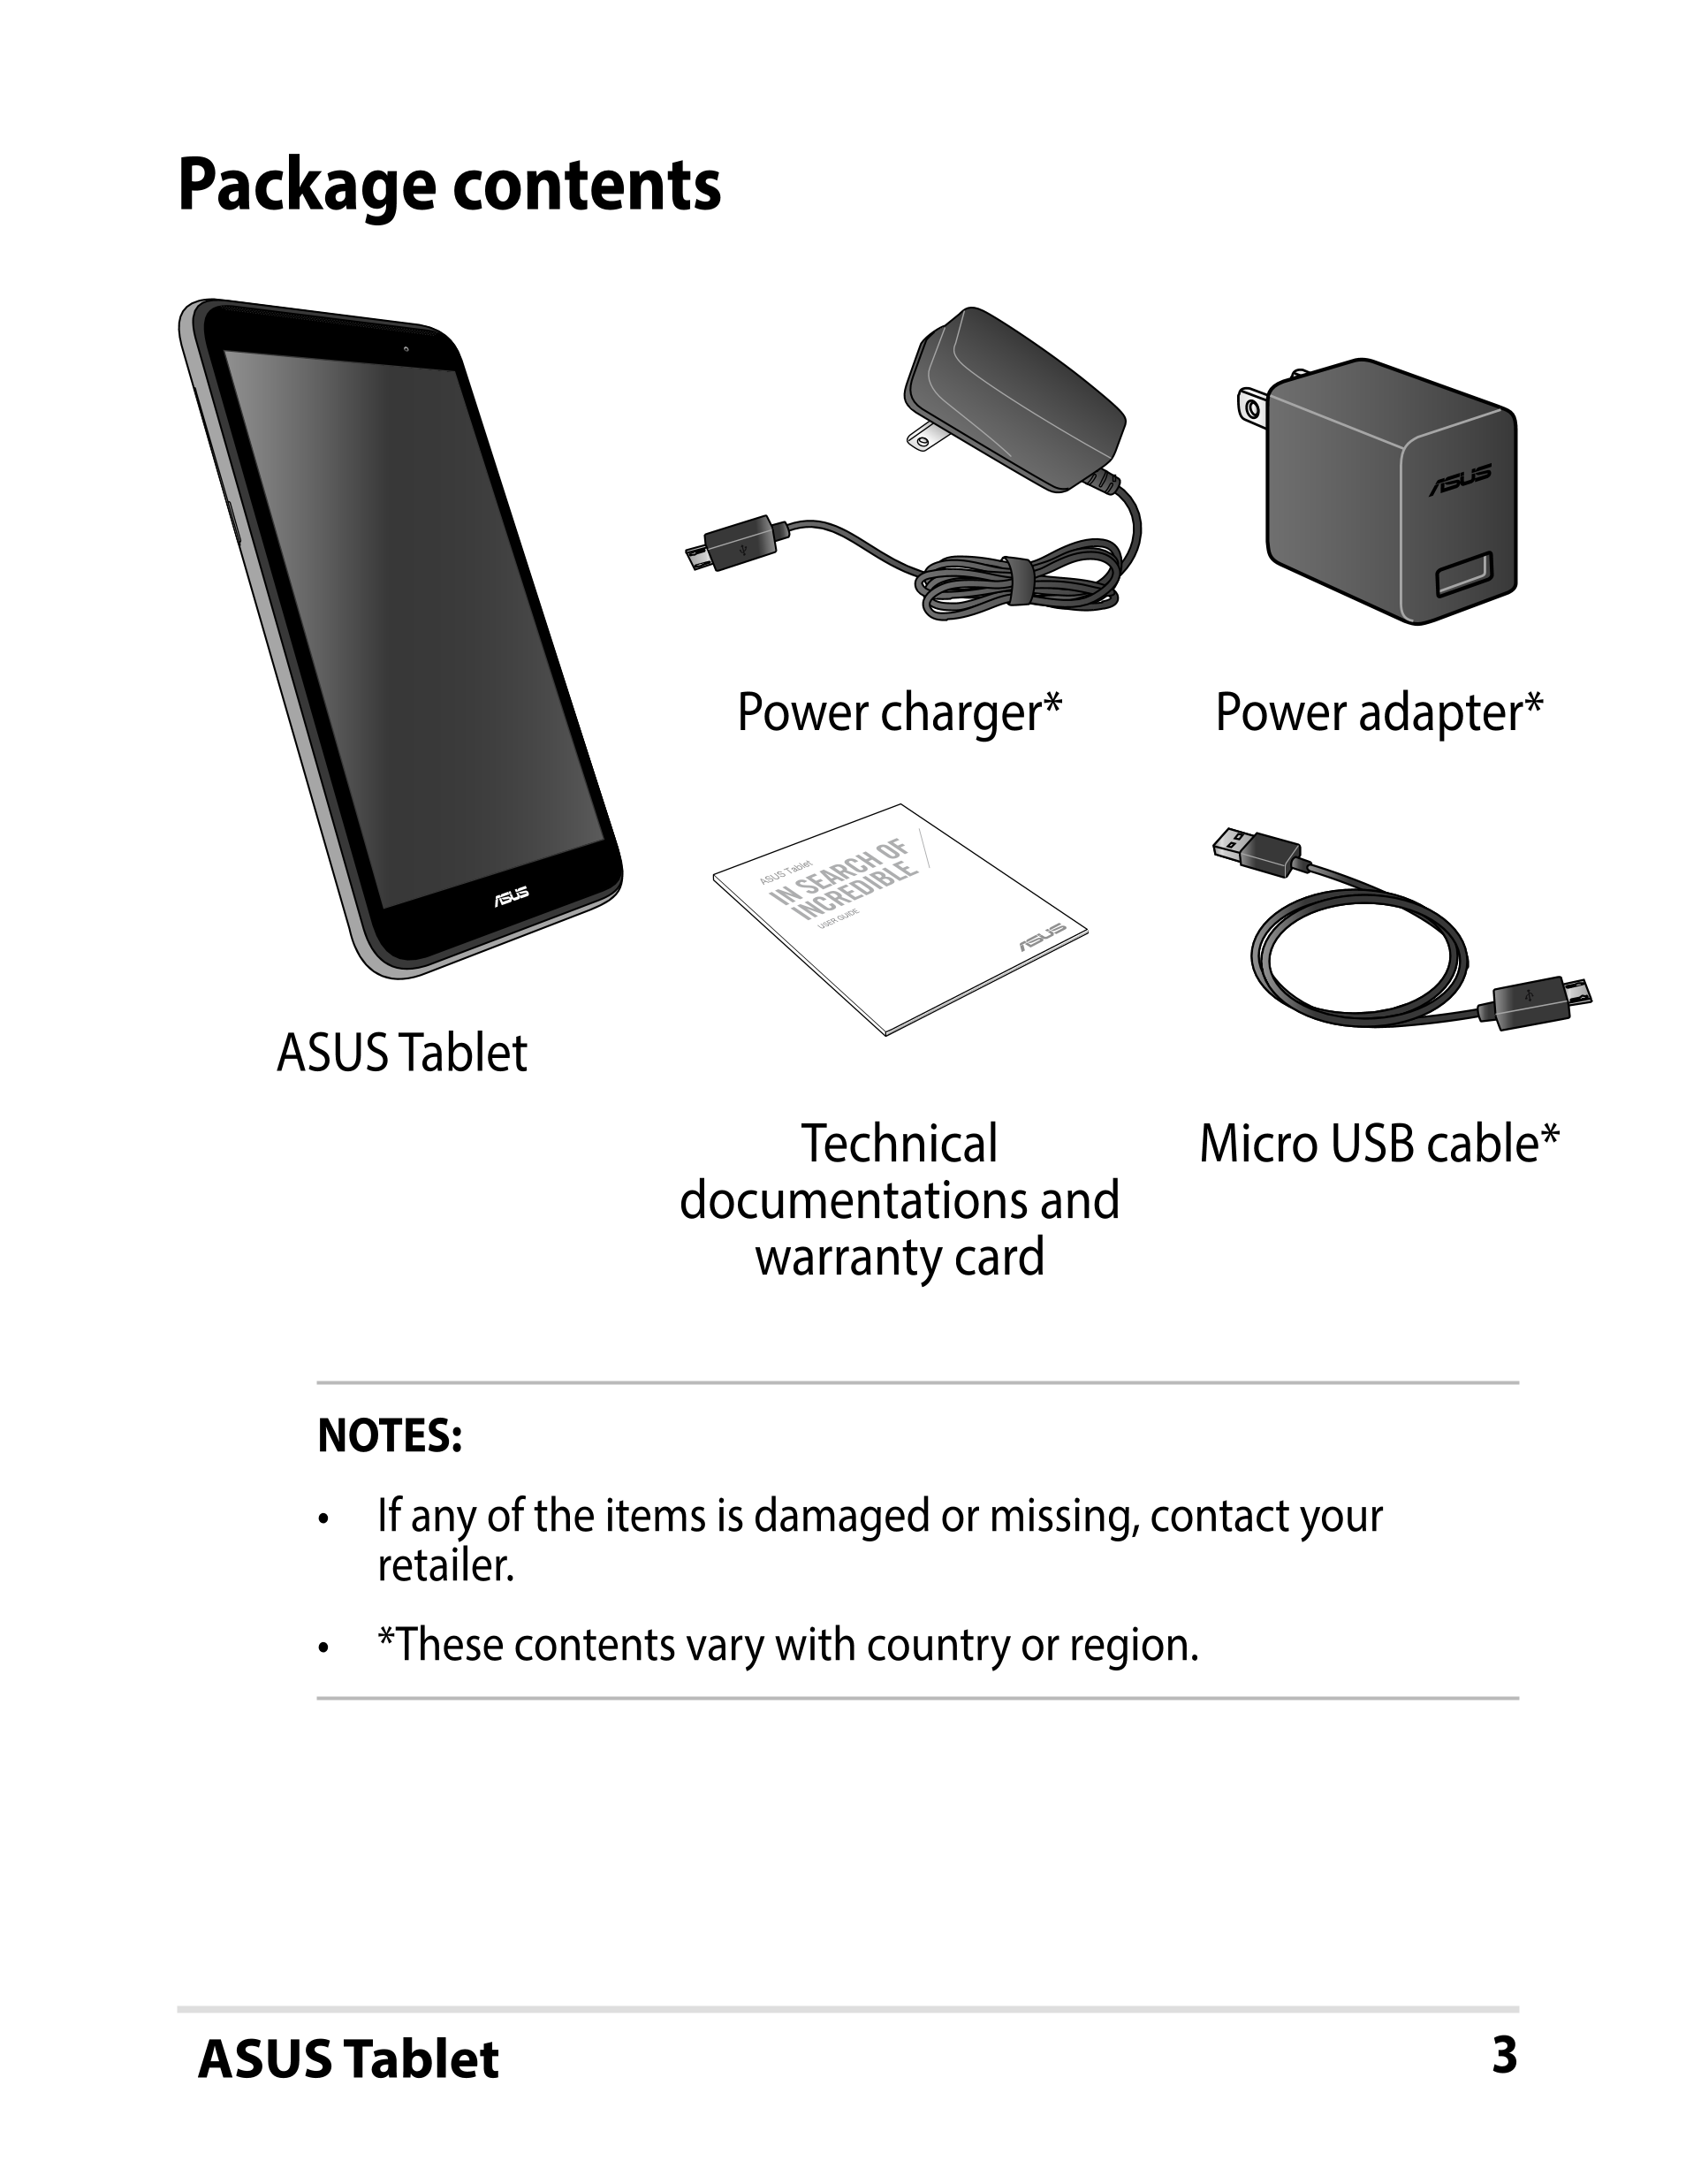 Package contents
Power charger* Power adapter*
ASUS Tablet
USER GUIDE
ASUS Tablet
Technical  Micro USB cable*
documentations and